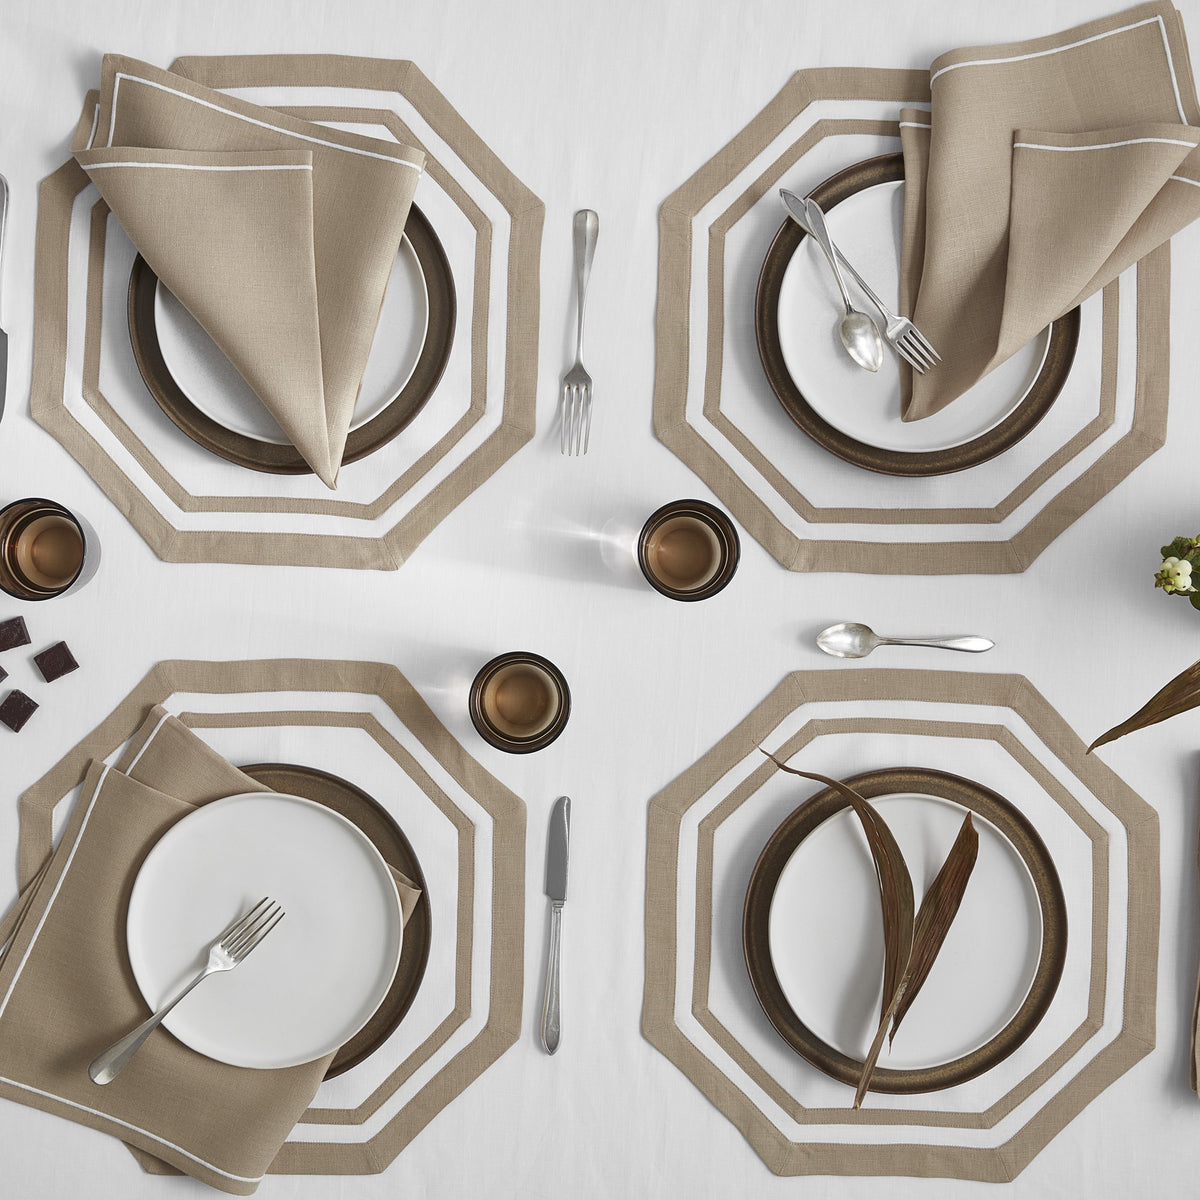 Matouk Double Border Placemats on a Table with Matouk Satin Stitch Napkins in Oat Color